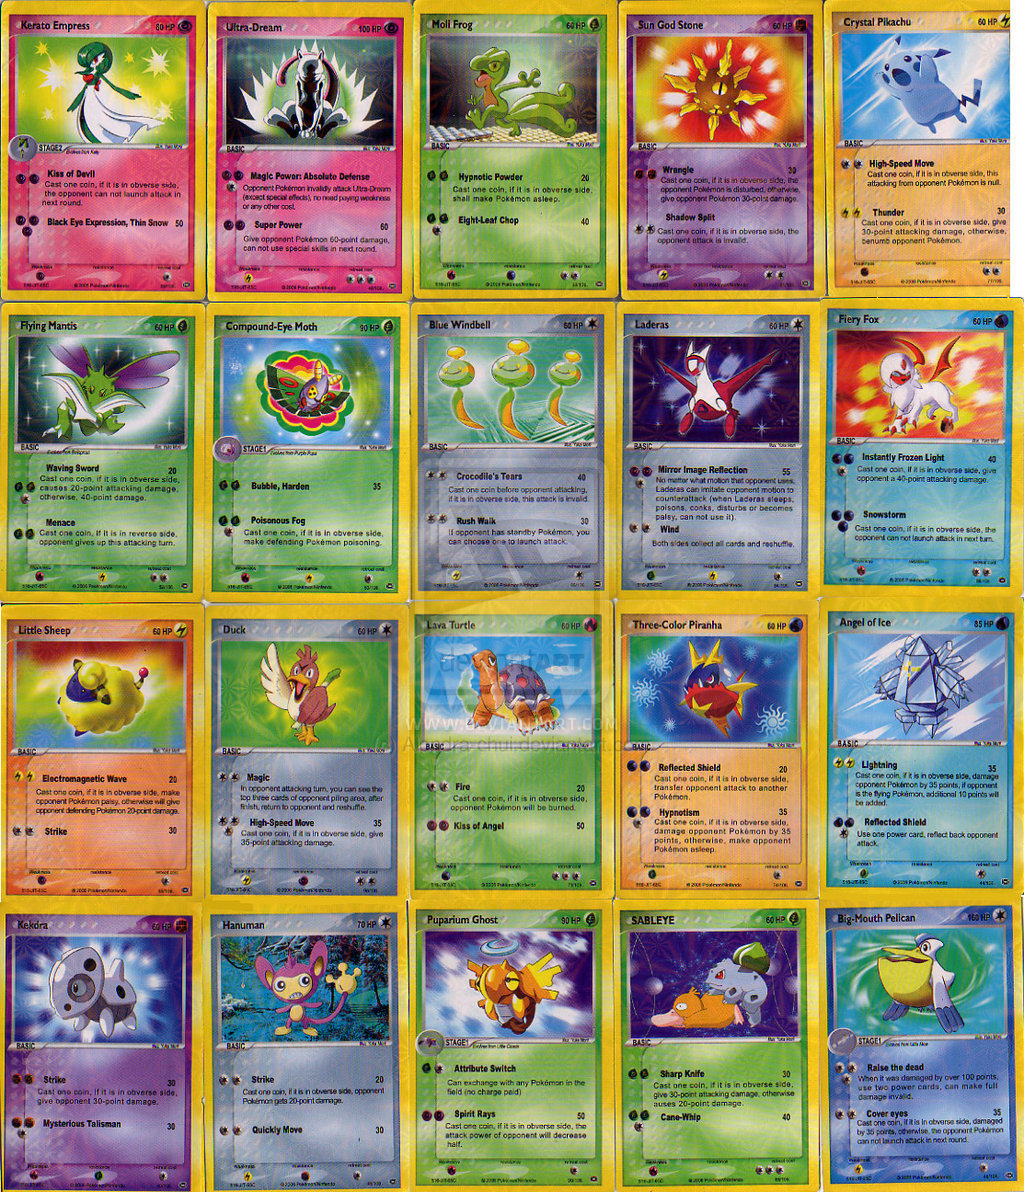 7 Best Images of Printable Pokemon Cards Real Size Print Pokemon